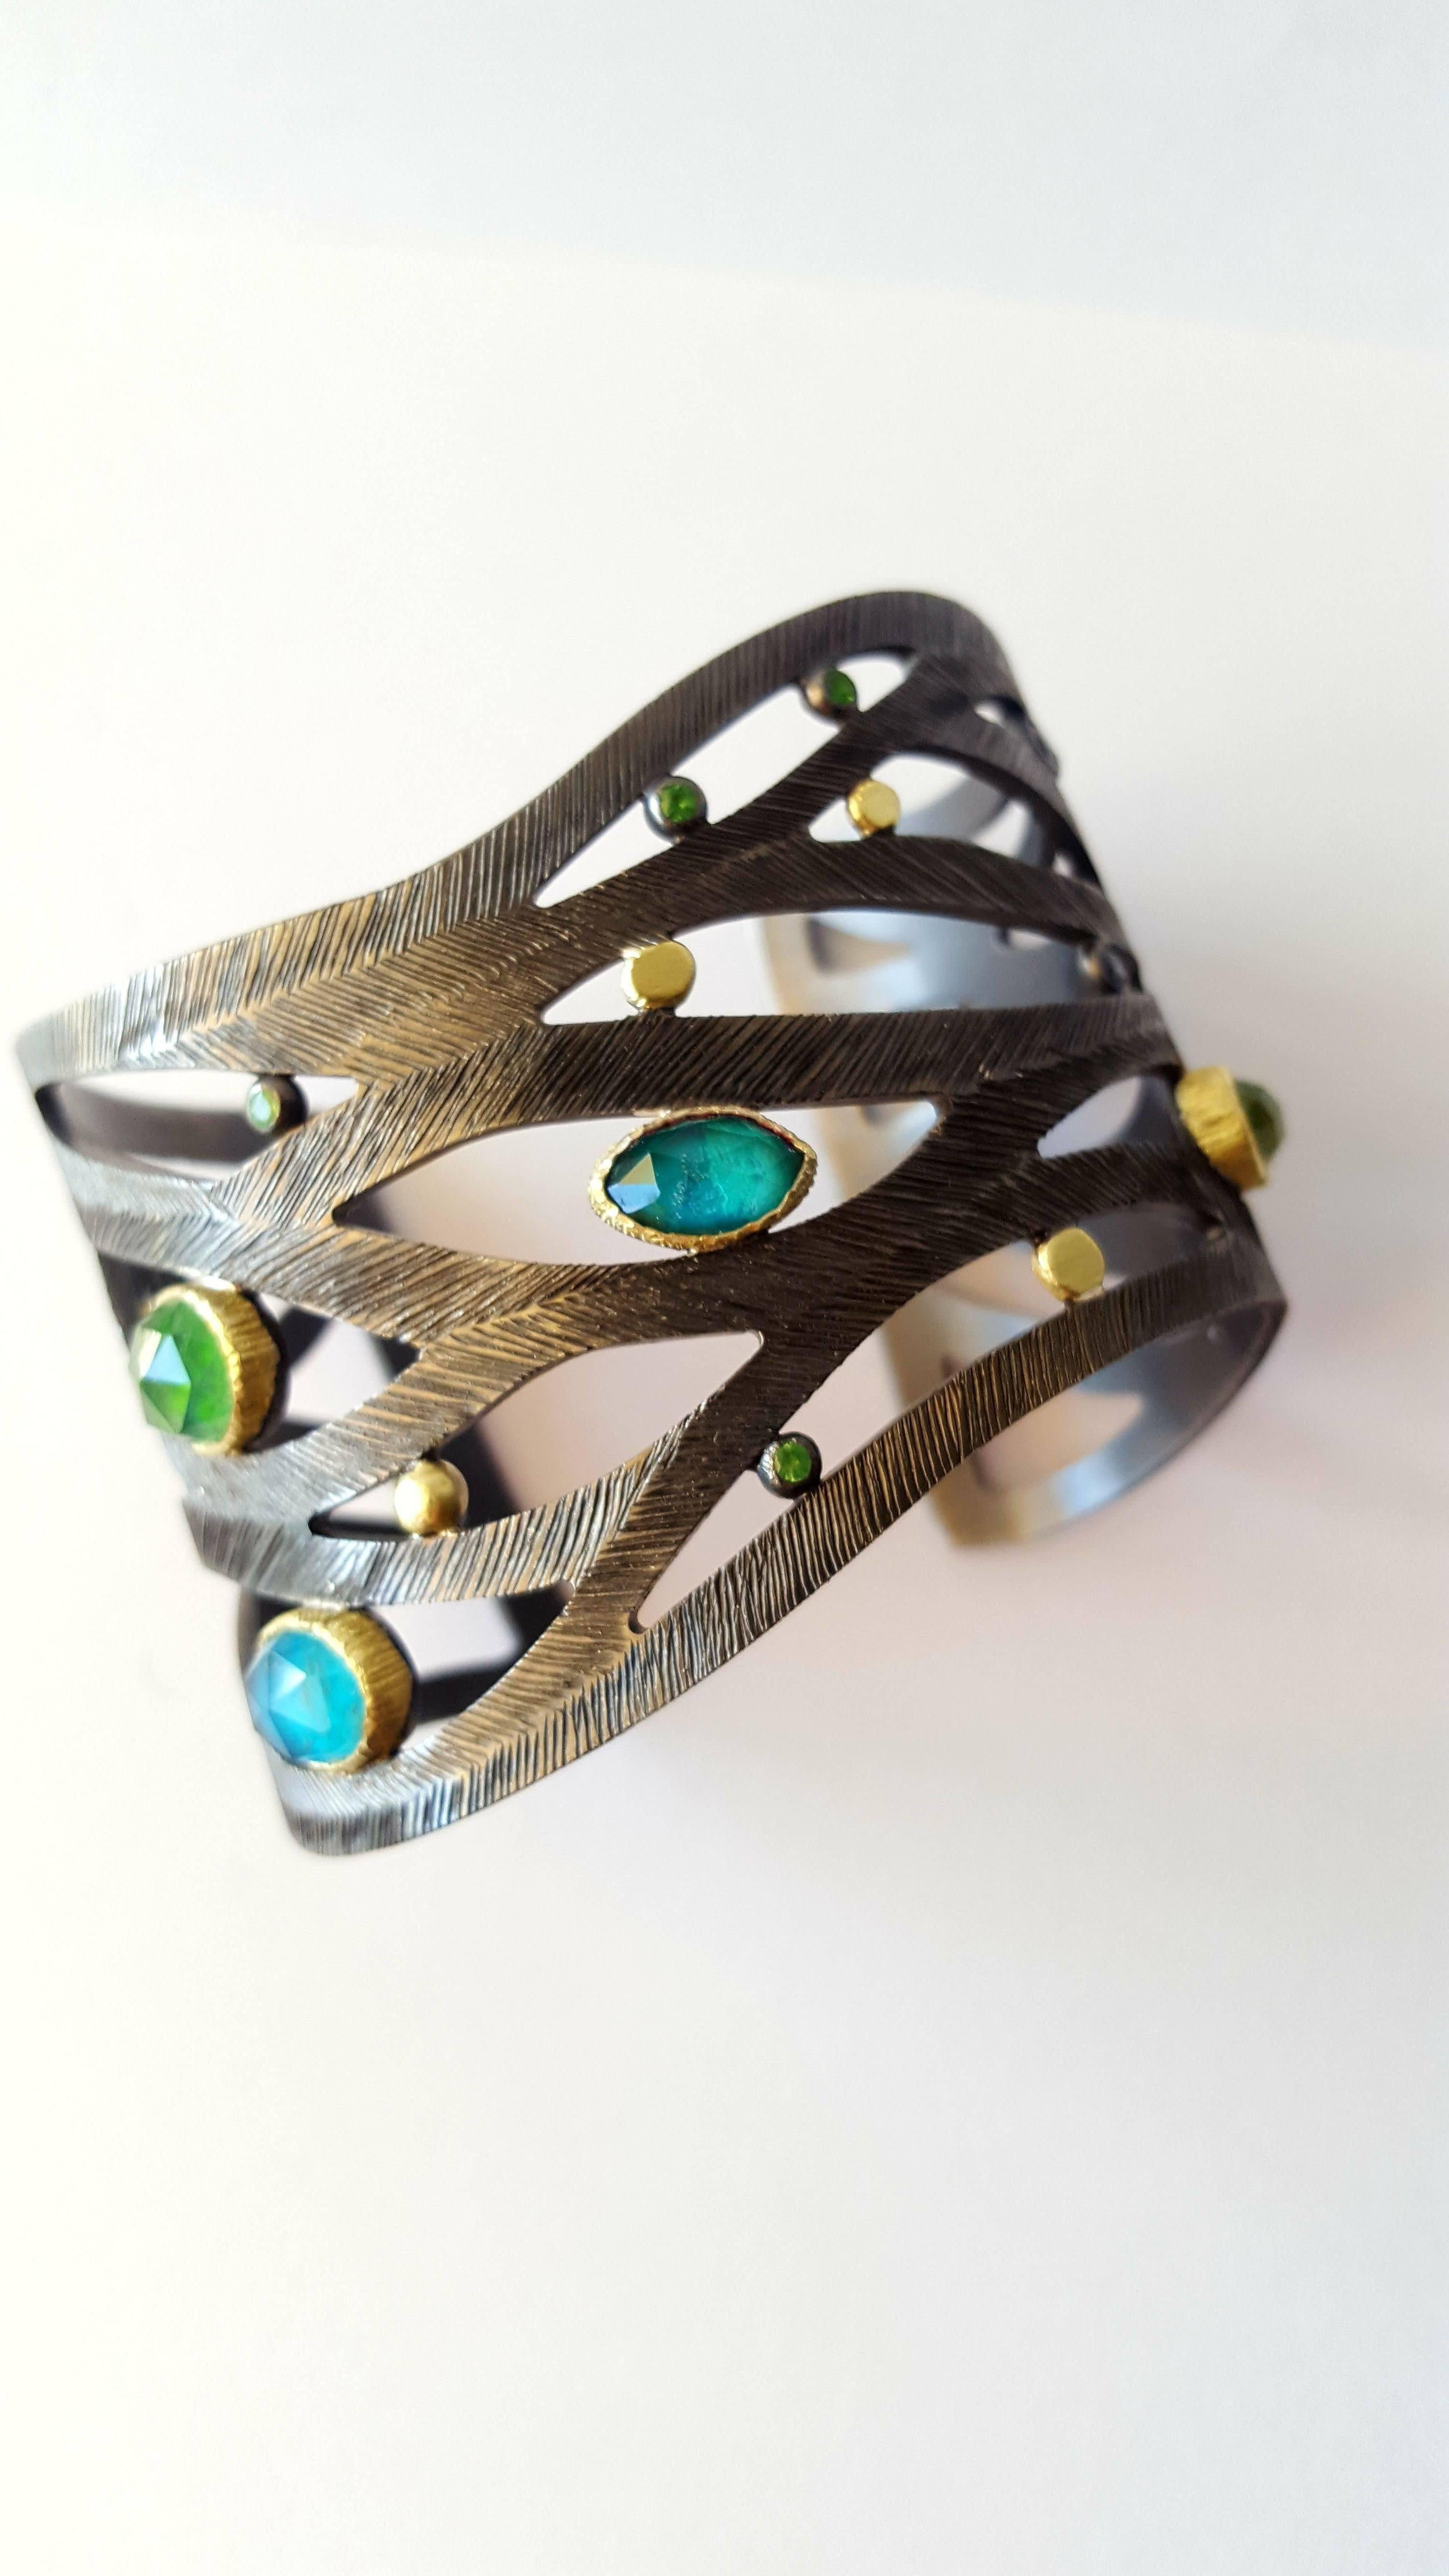 A stunning cuff bracelet in black rhodium plated sterling silver 925 and  18k green gold with apatite, dioptase, chrysocolla, tourmaline/rock crystal doublets and peridot. Very comfortable to wear this stunningly eye-catching bracelet has a very